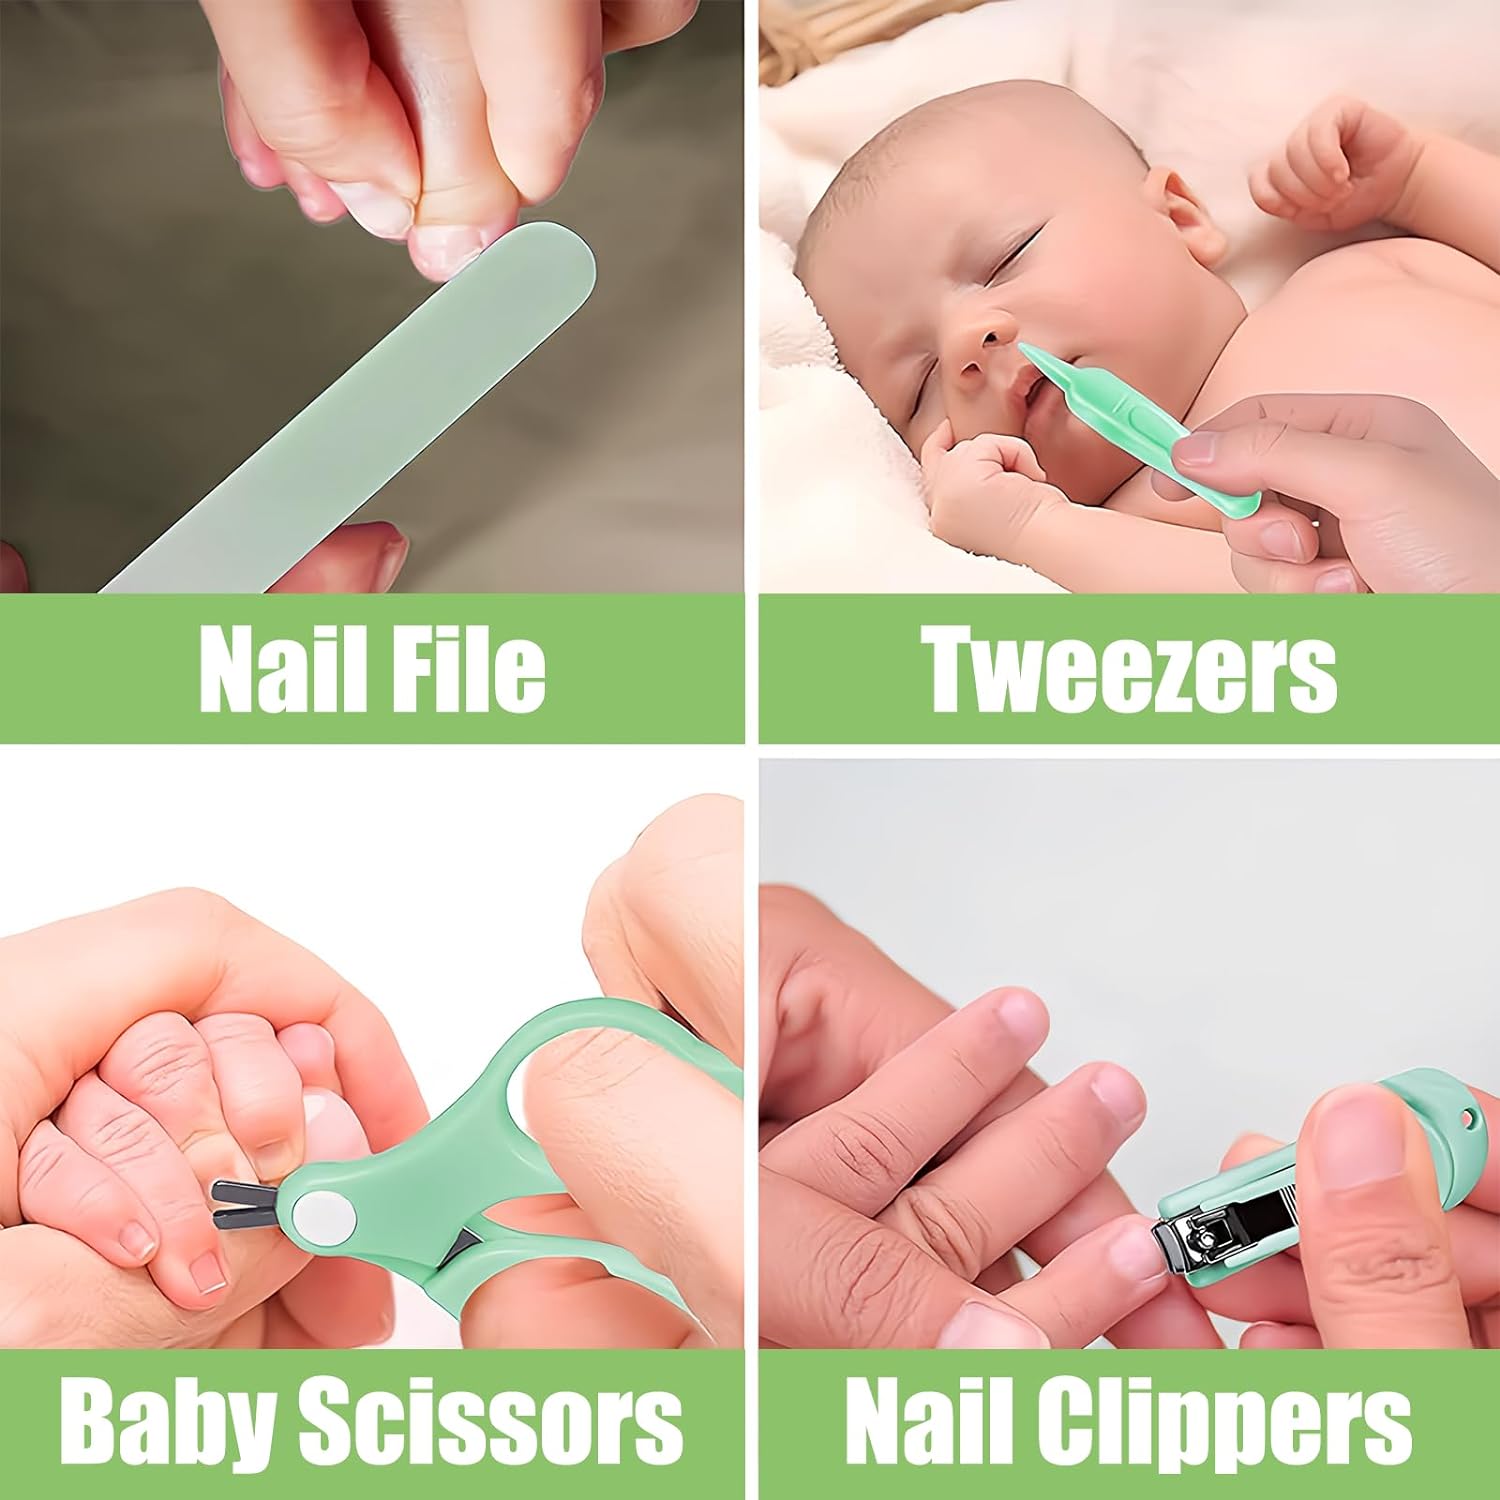 Nasal Aspirator for Baby Electric Nose Aspirator for Toddler Baby Nose Aspirator Adjustable 6 Levels of Suction Automatic Nose Cleaner with Nail Clippers, Scissors, Nail Files, Tweezers for Newborns